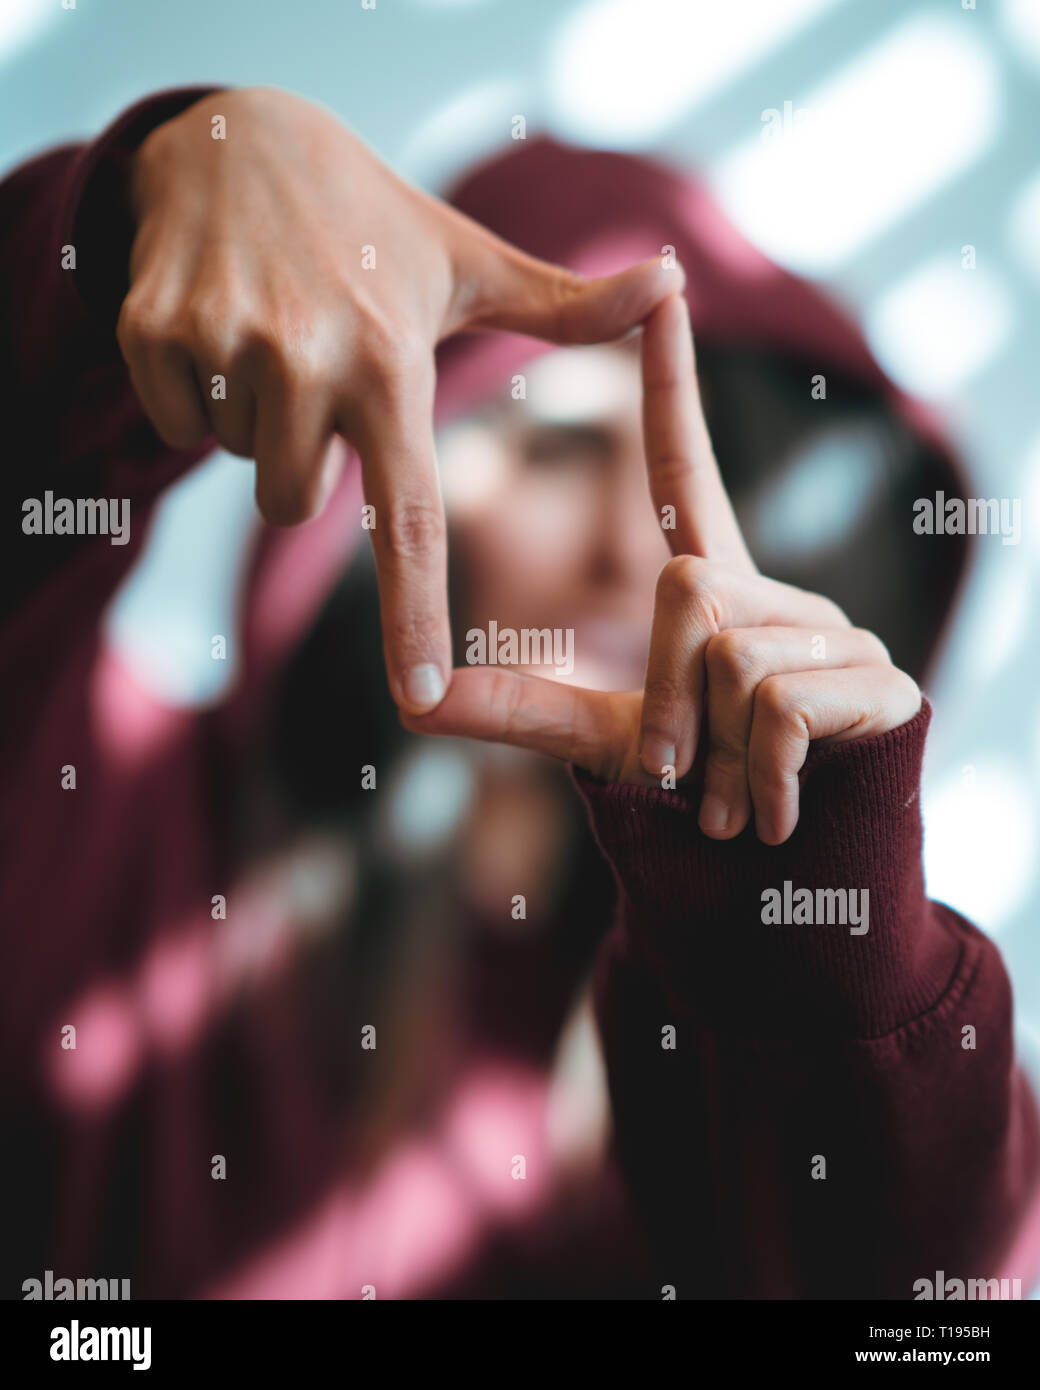 Woman showing framing hand gesture on bright background. Stock Photo